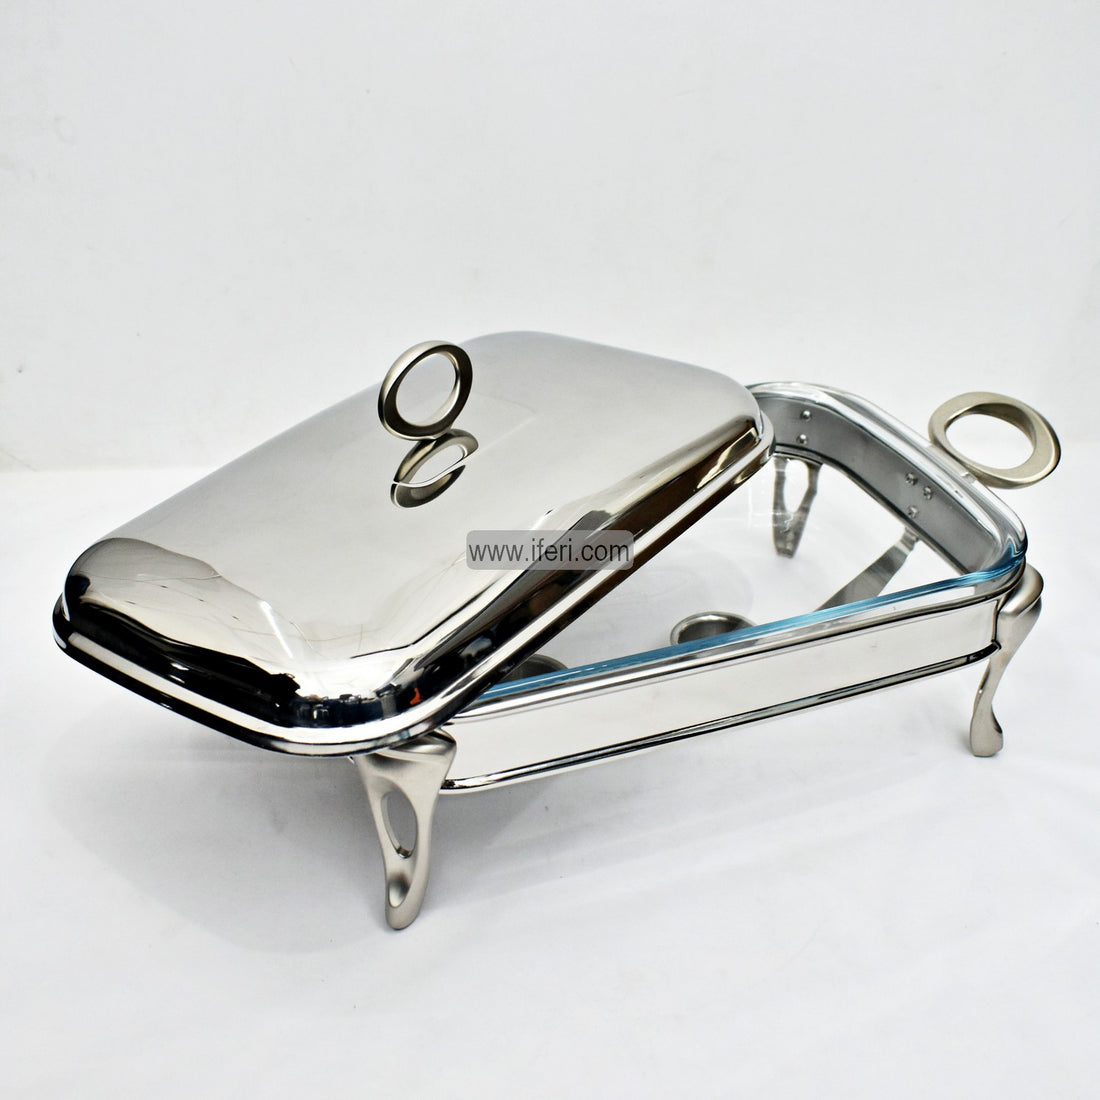 2 Liter Rectangular Exclusive Chafing Dish Food Warmer SY14257